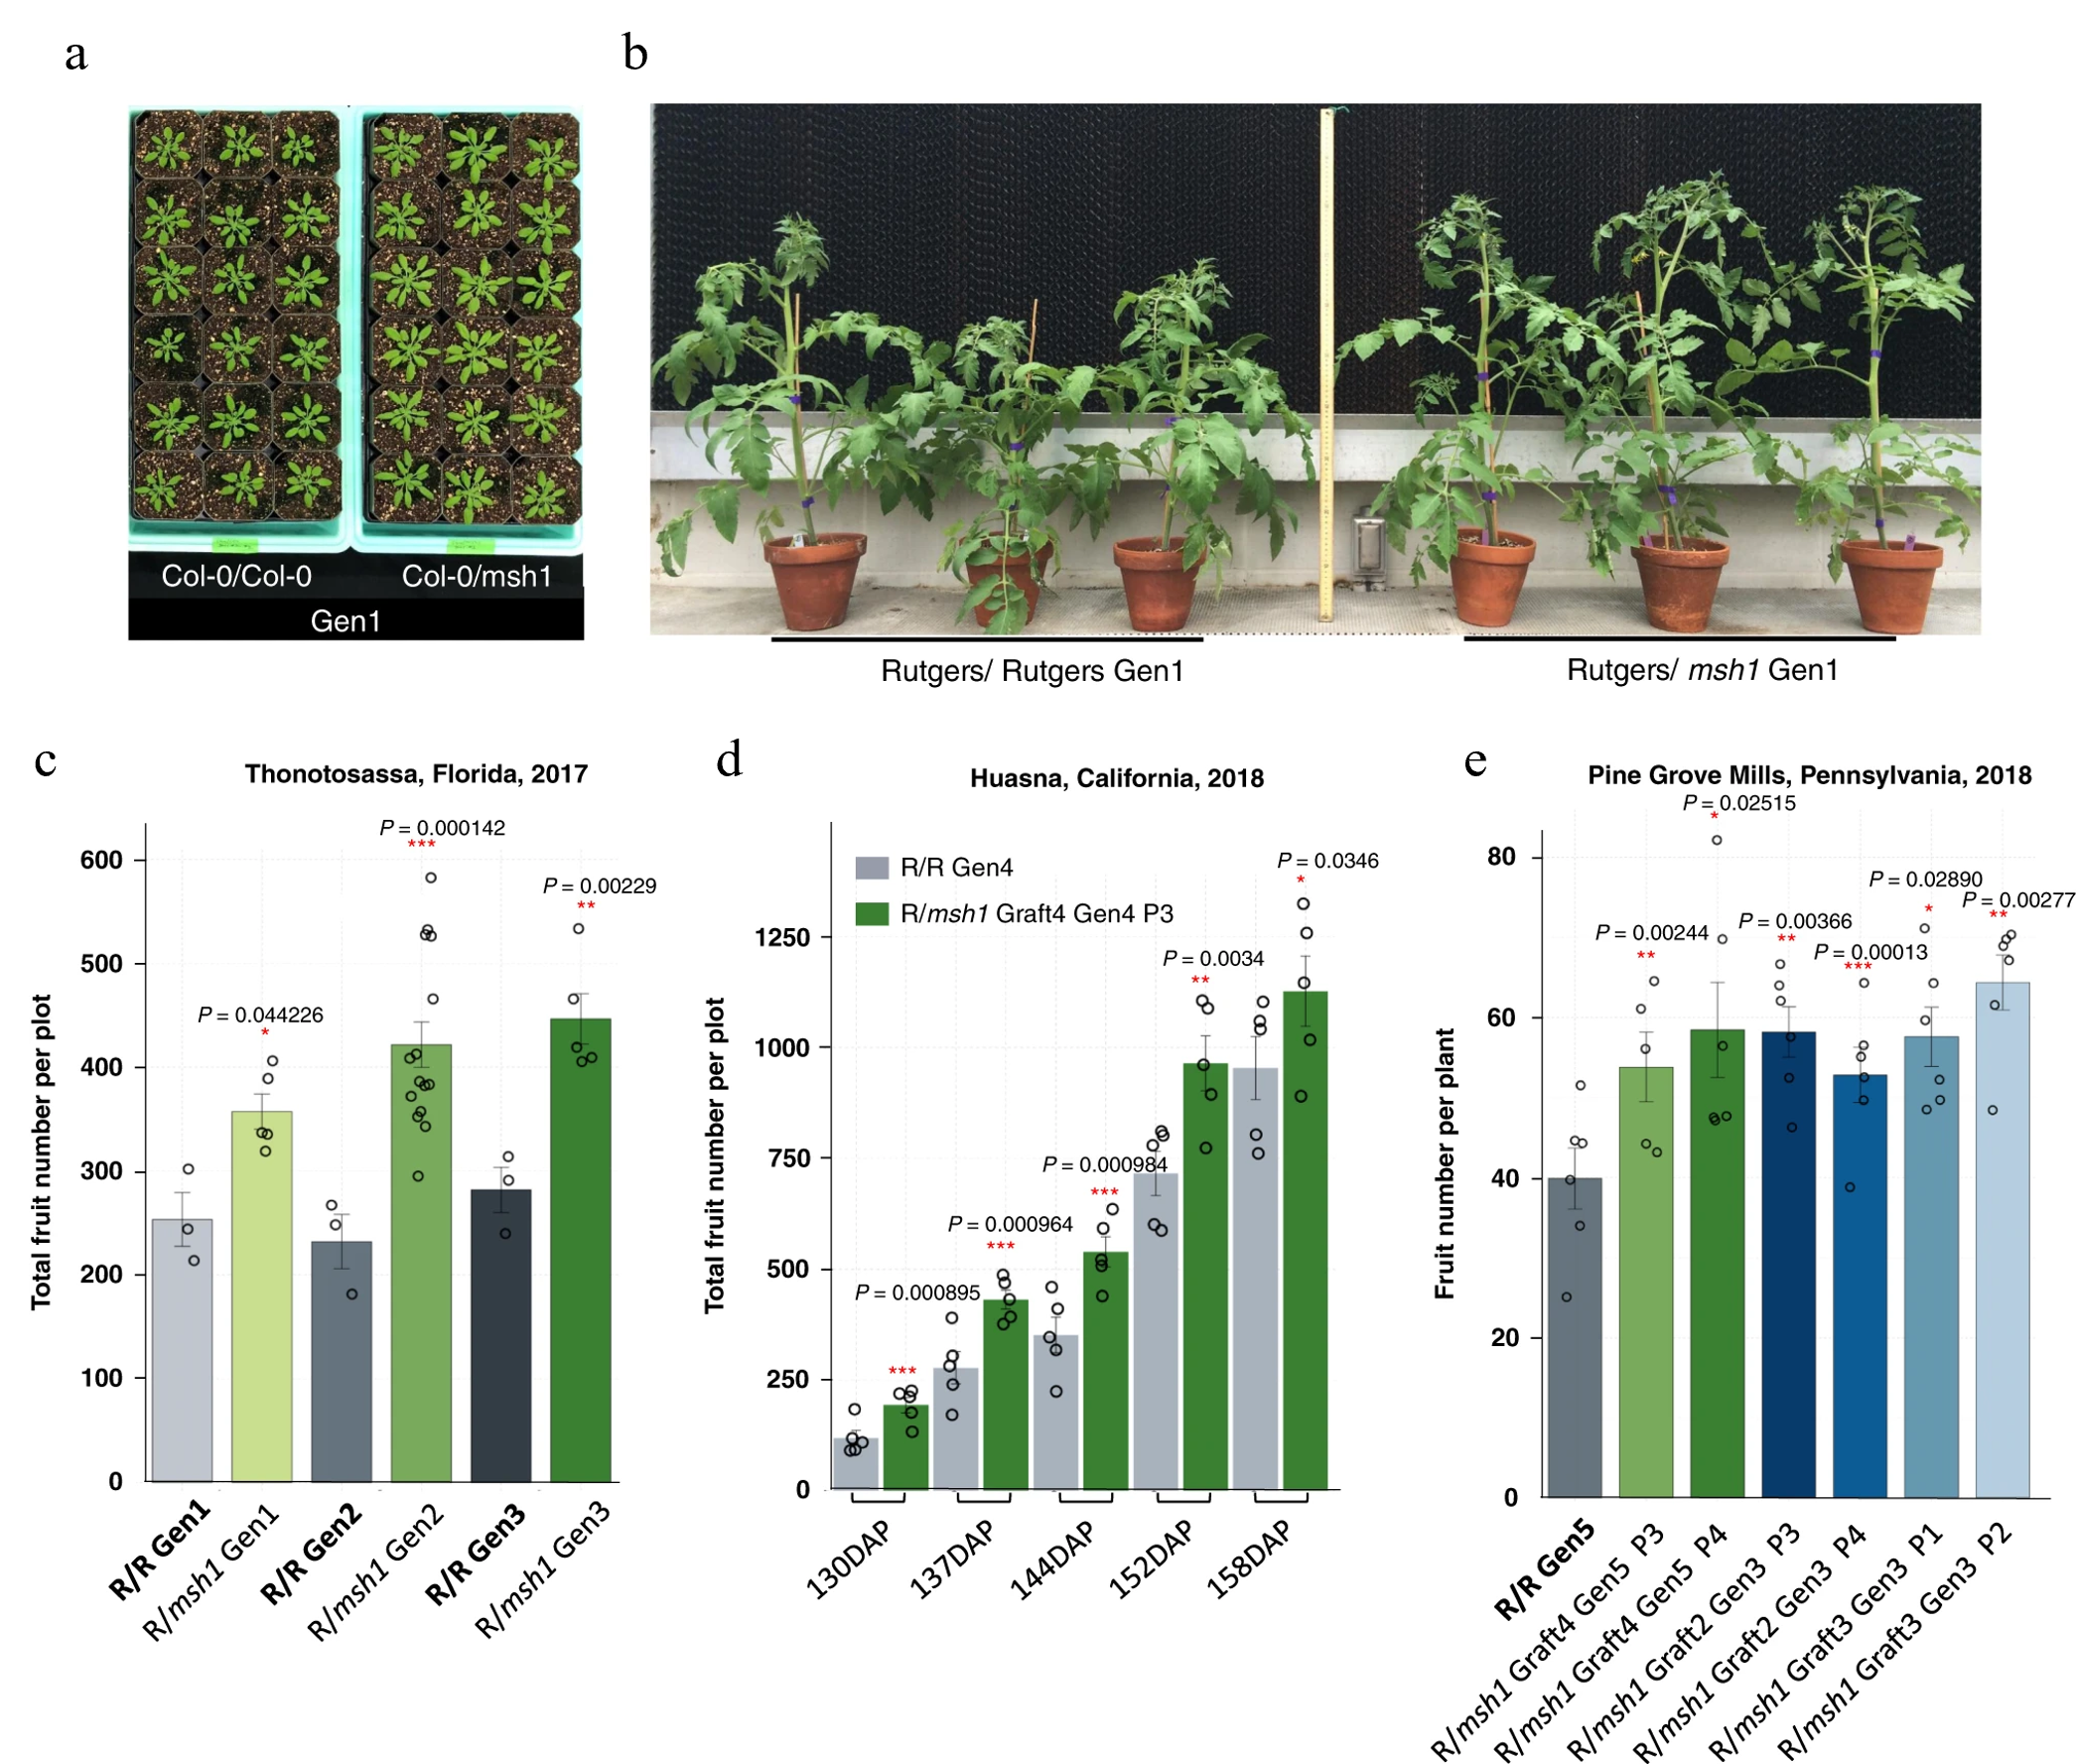 FIG. 2. a. Seedlings from grafted Arabidopsis plants comparing a control graft (left) with a graft from a plant containing a mutation on the msh1 gene. Research shows mutations on this gene trigger epigenetic reprogramming in the plant. b-e. Examples of greater vigor and seed yield for msh1 mutated tomato plants over multiple generations in different field locations. Source: Kundariya, H., et al., Nat. Comm., 11, 5343, 2020.